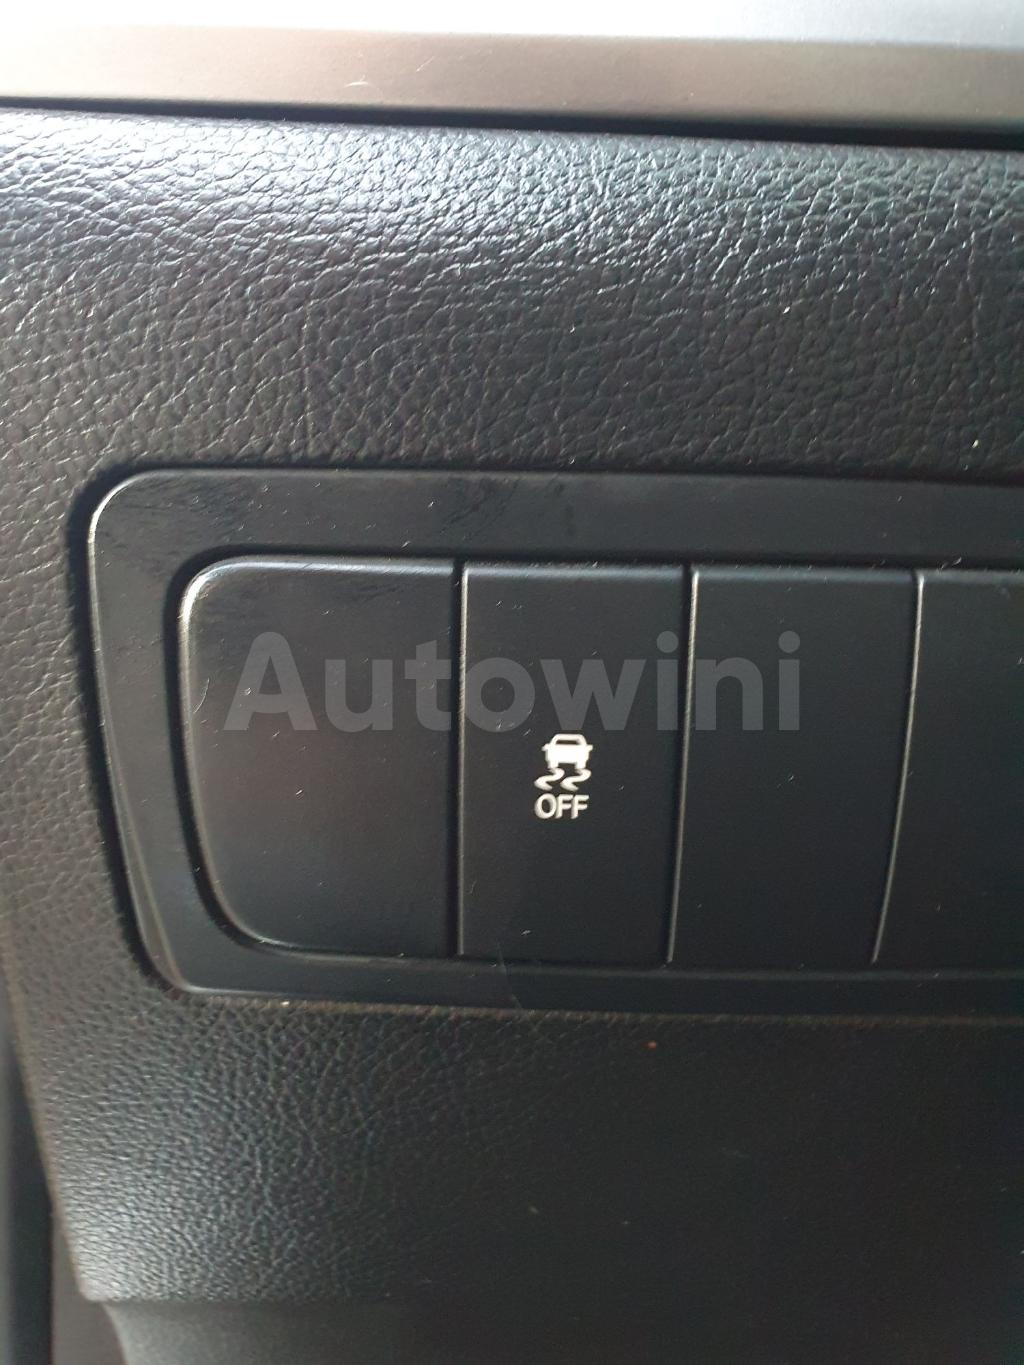 2011 SSANGYONG KORANDO C SUNROOF R CAM ABS AT - 25